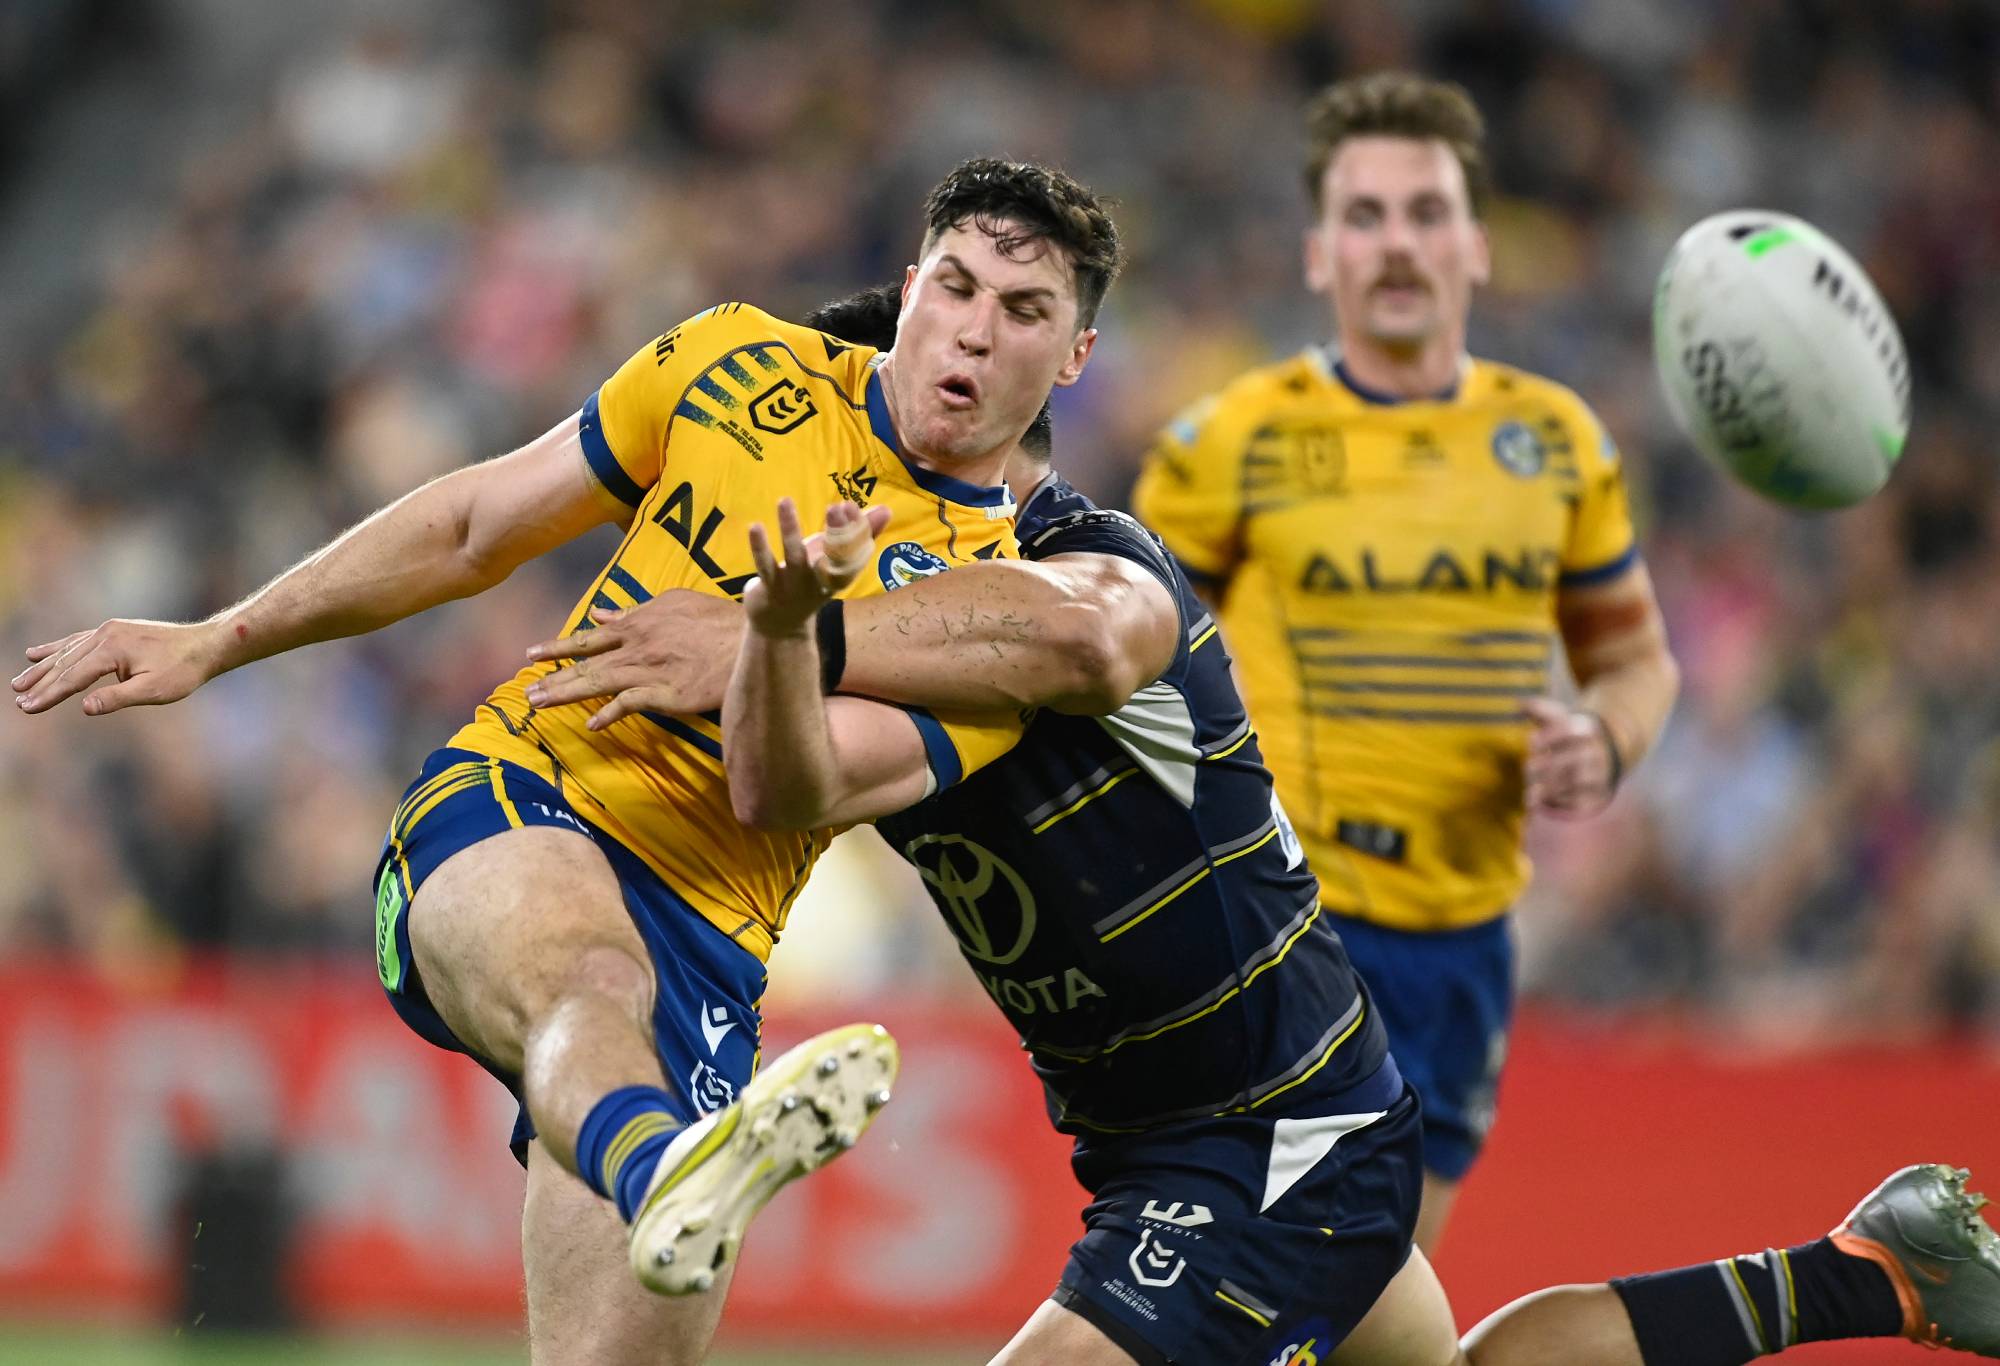 TOWNSVILLE, AUSTRALIA - SEPTEMBER 23: Mitchell Moses of the Eels kicks the ball during the NRL Preliminary Final match between the North Queensland Cowboys and the Parramatta Eels at Queensland Country Bank Stadium on September 23, 2022 in Townsville, Australia. (Photo by Ian Hitchcock/Getty Images)